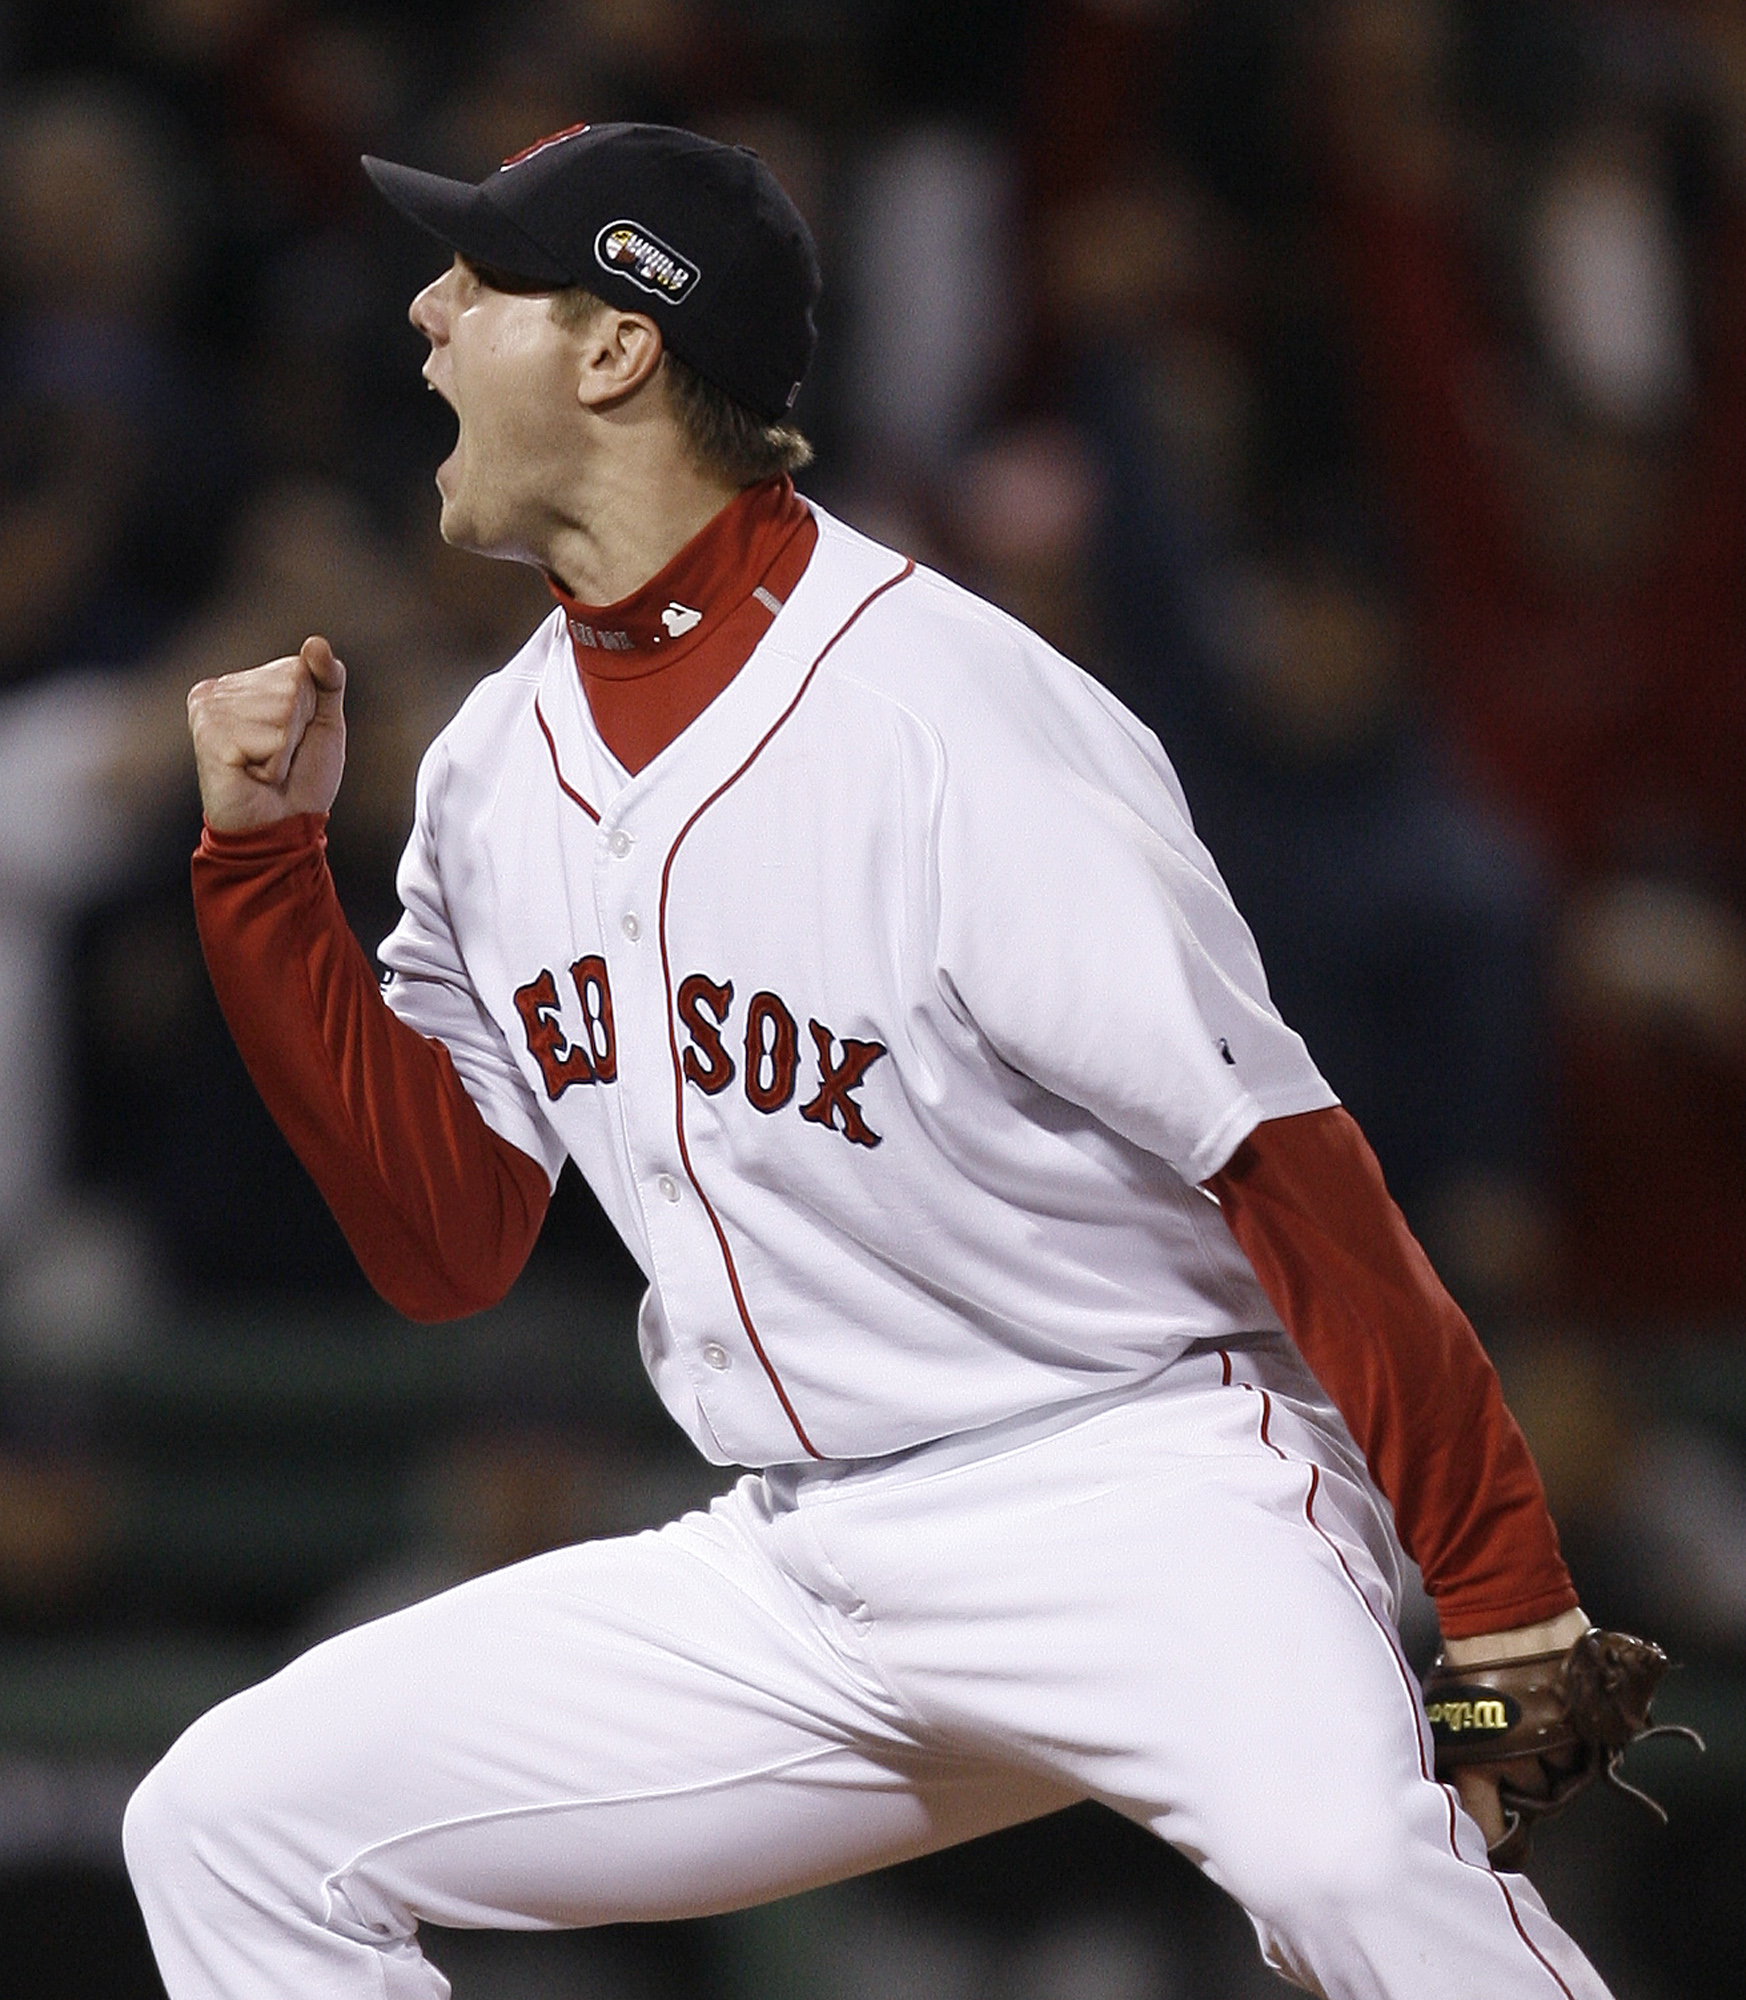 Jonathan Papelbon, Mo Vaughn, Kevin Youkilis to join NESN as Boston Red Sox  studio analysts once per week; Ellis Burks will join broadcast 